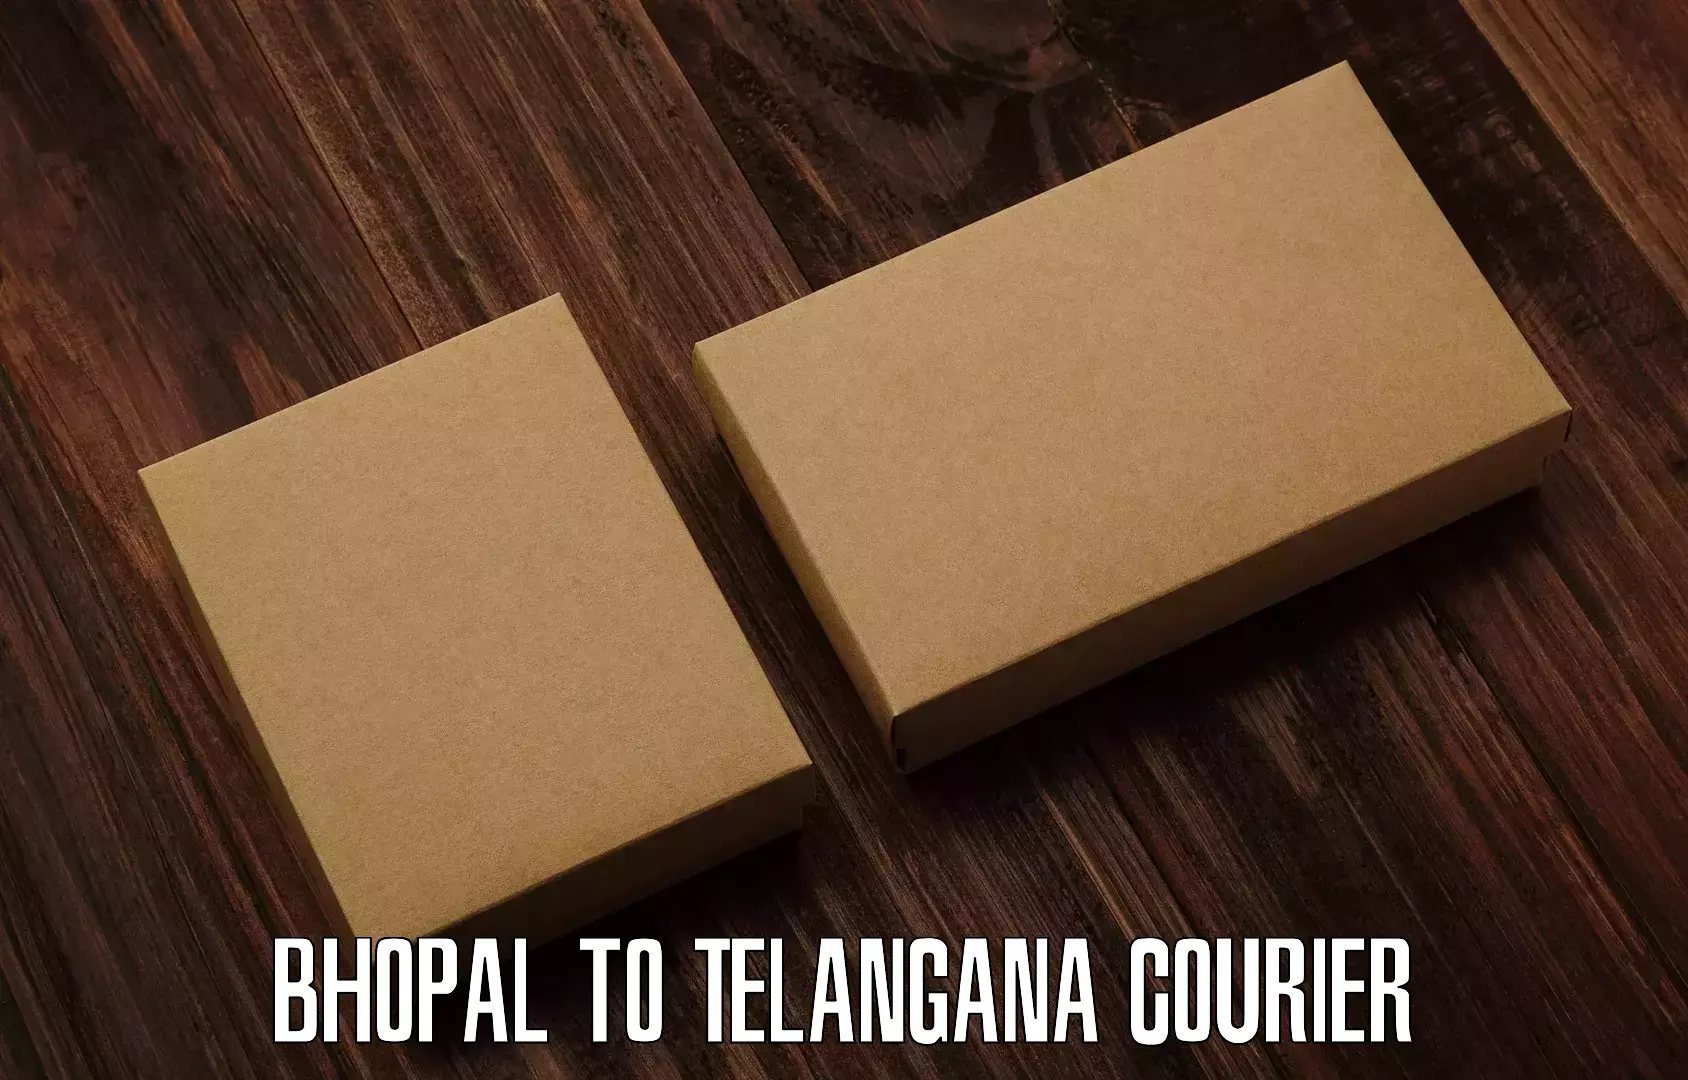 State-of-the-art courier technology Bhopal to Bhuvanagiri